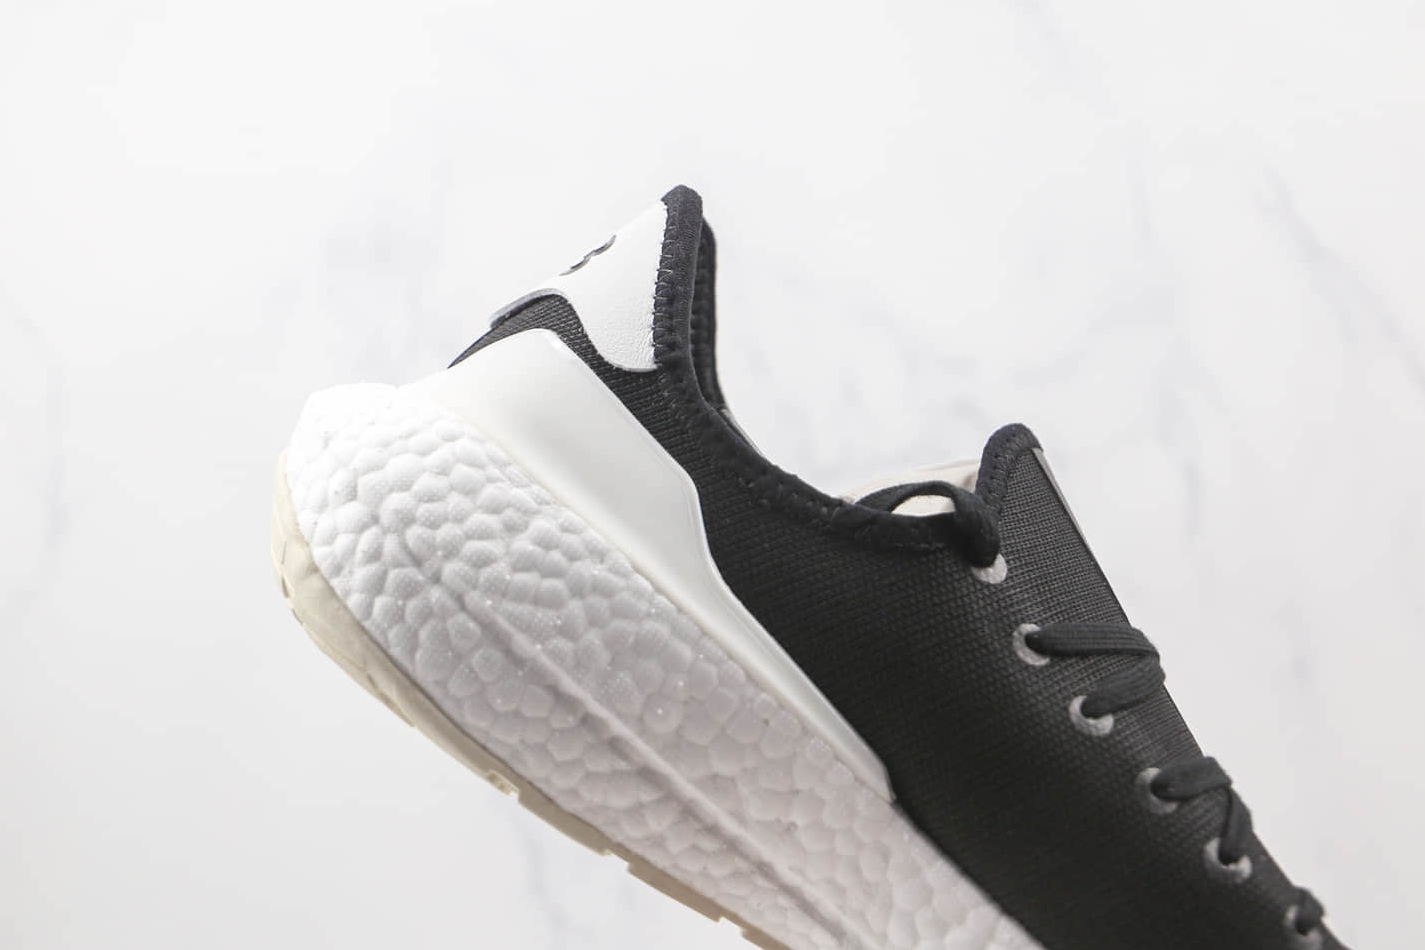 Adidas Y-3 UltraBoost 21 Black White H67476 - Stylish Performance Running Shoes